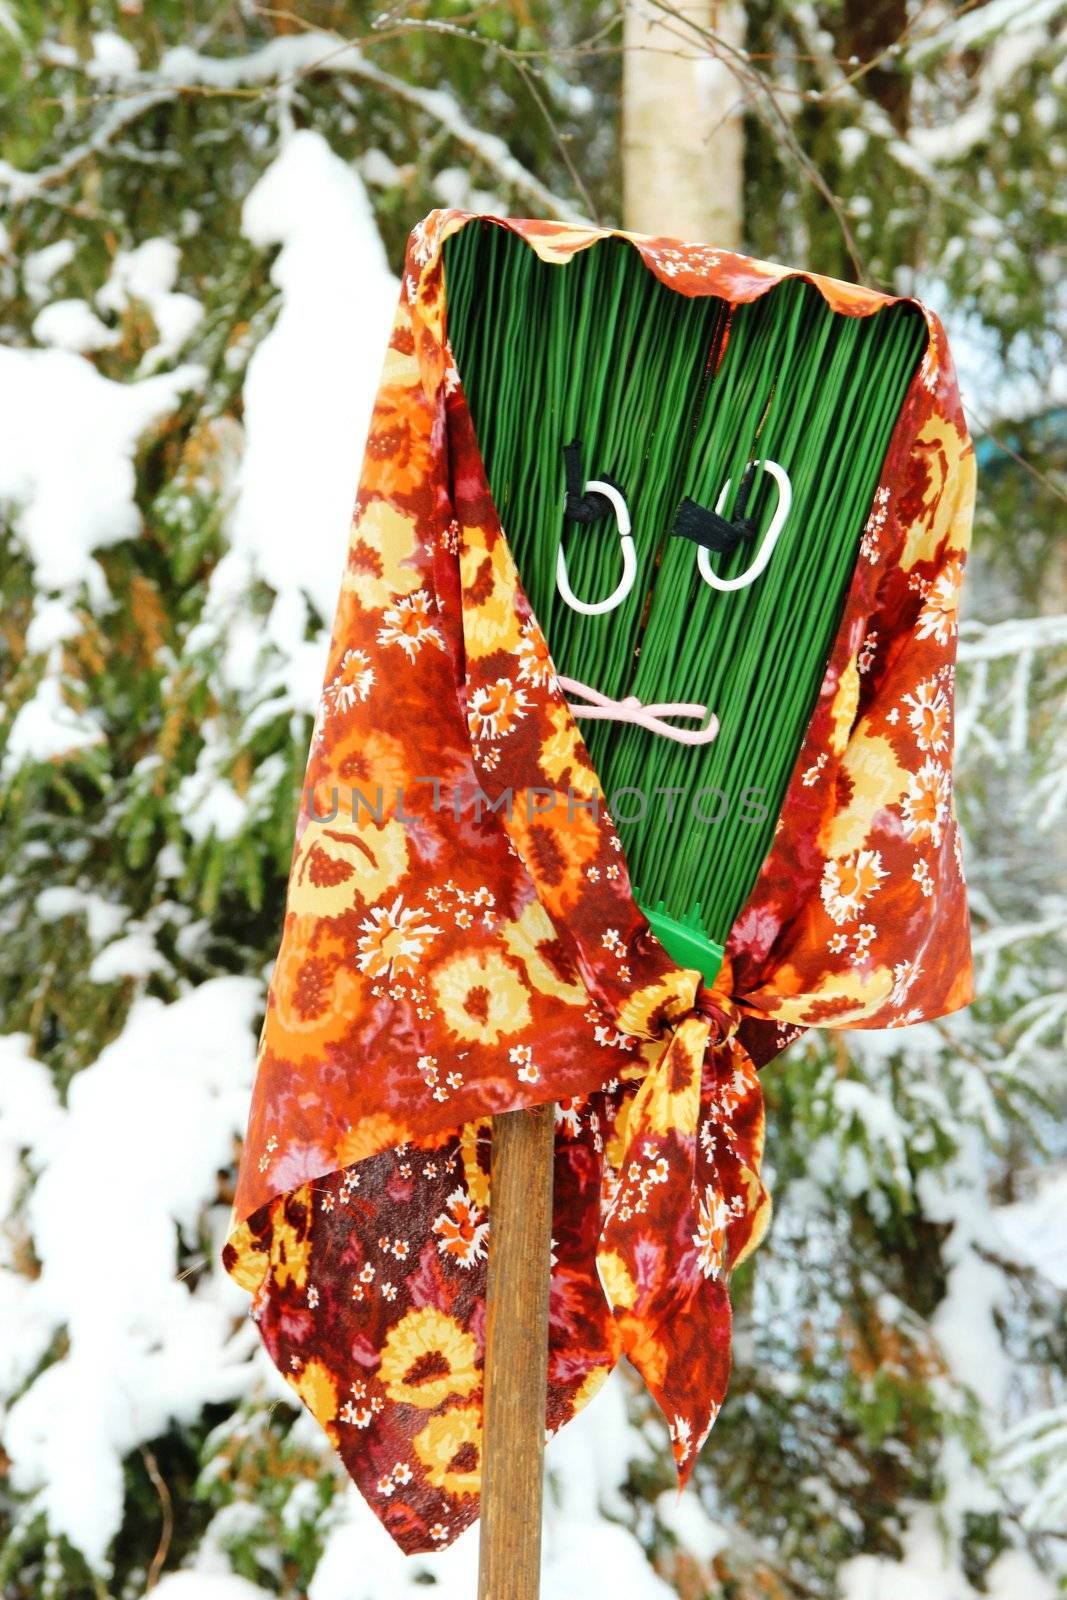 Funny broom with an ugly face in winter, snow landscape